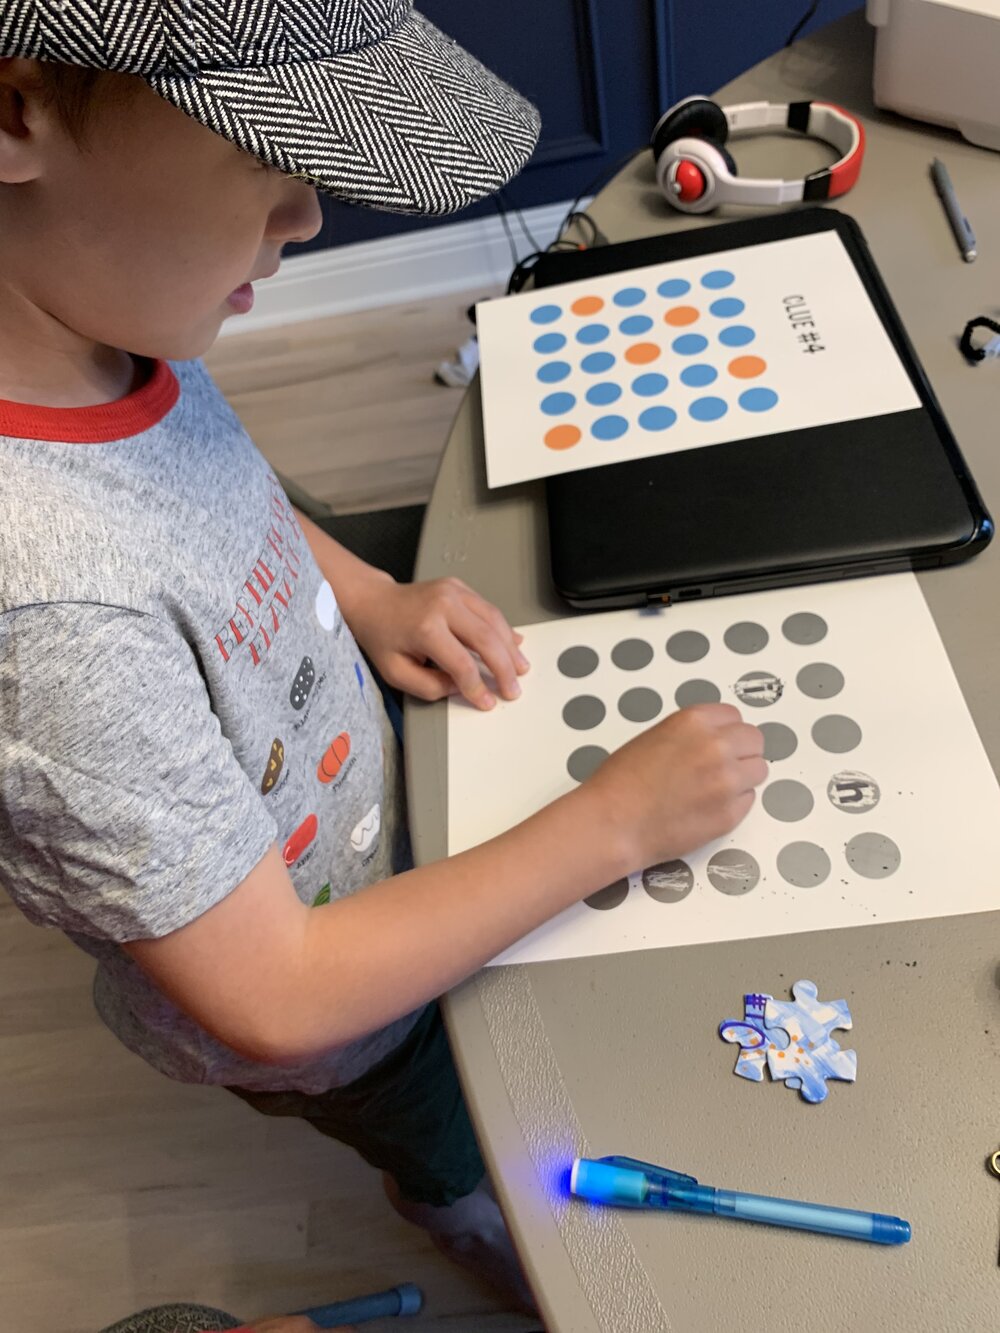  Scratch off stickers and a pattern clue to reveal a password. 